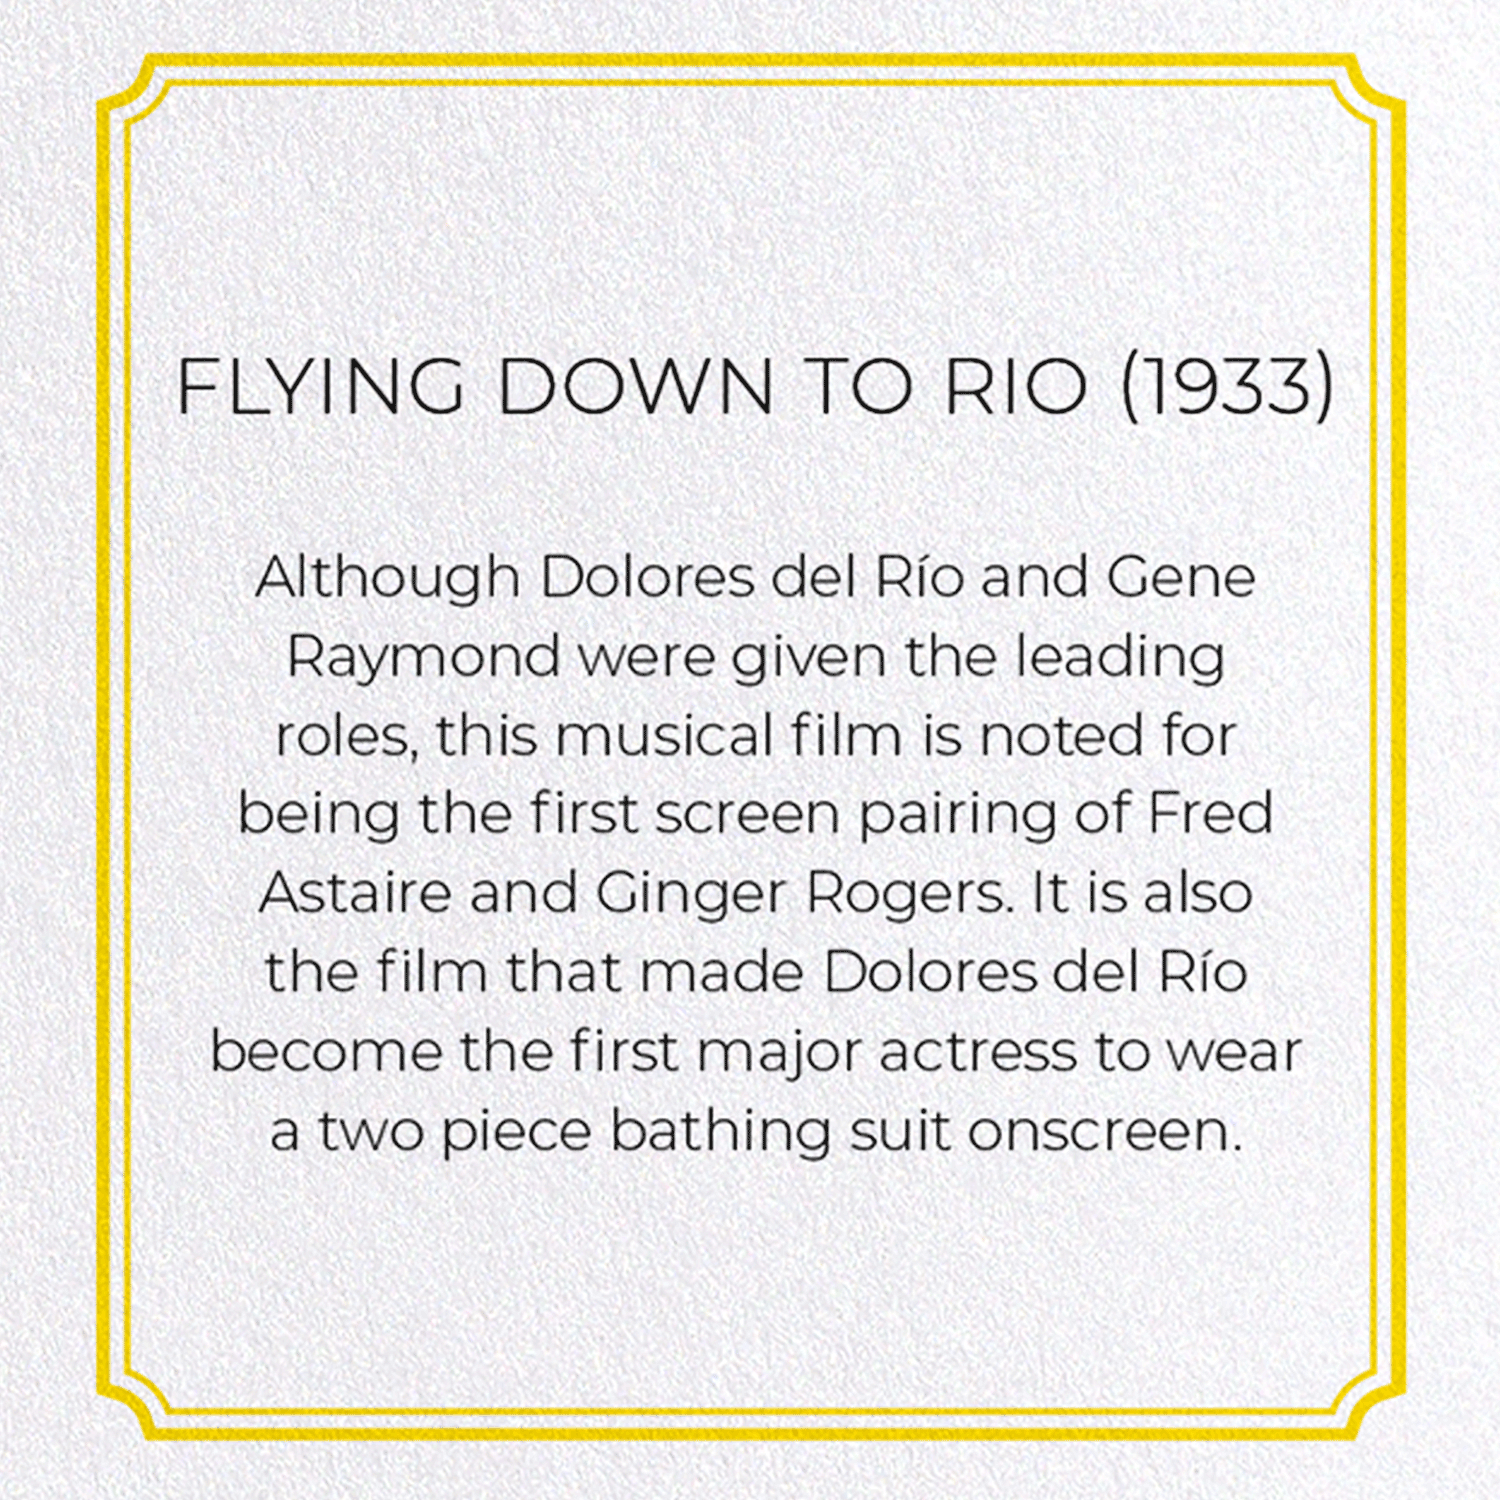 FLYING DOWN TO RIO (1933): Poster Greeting Card